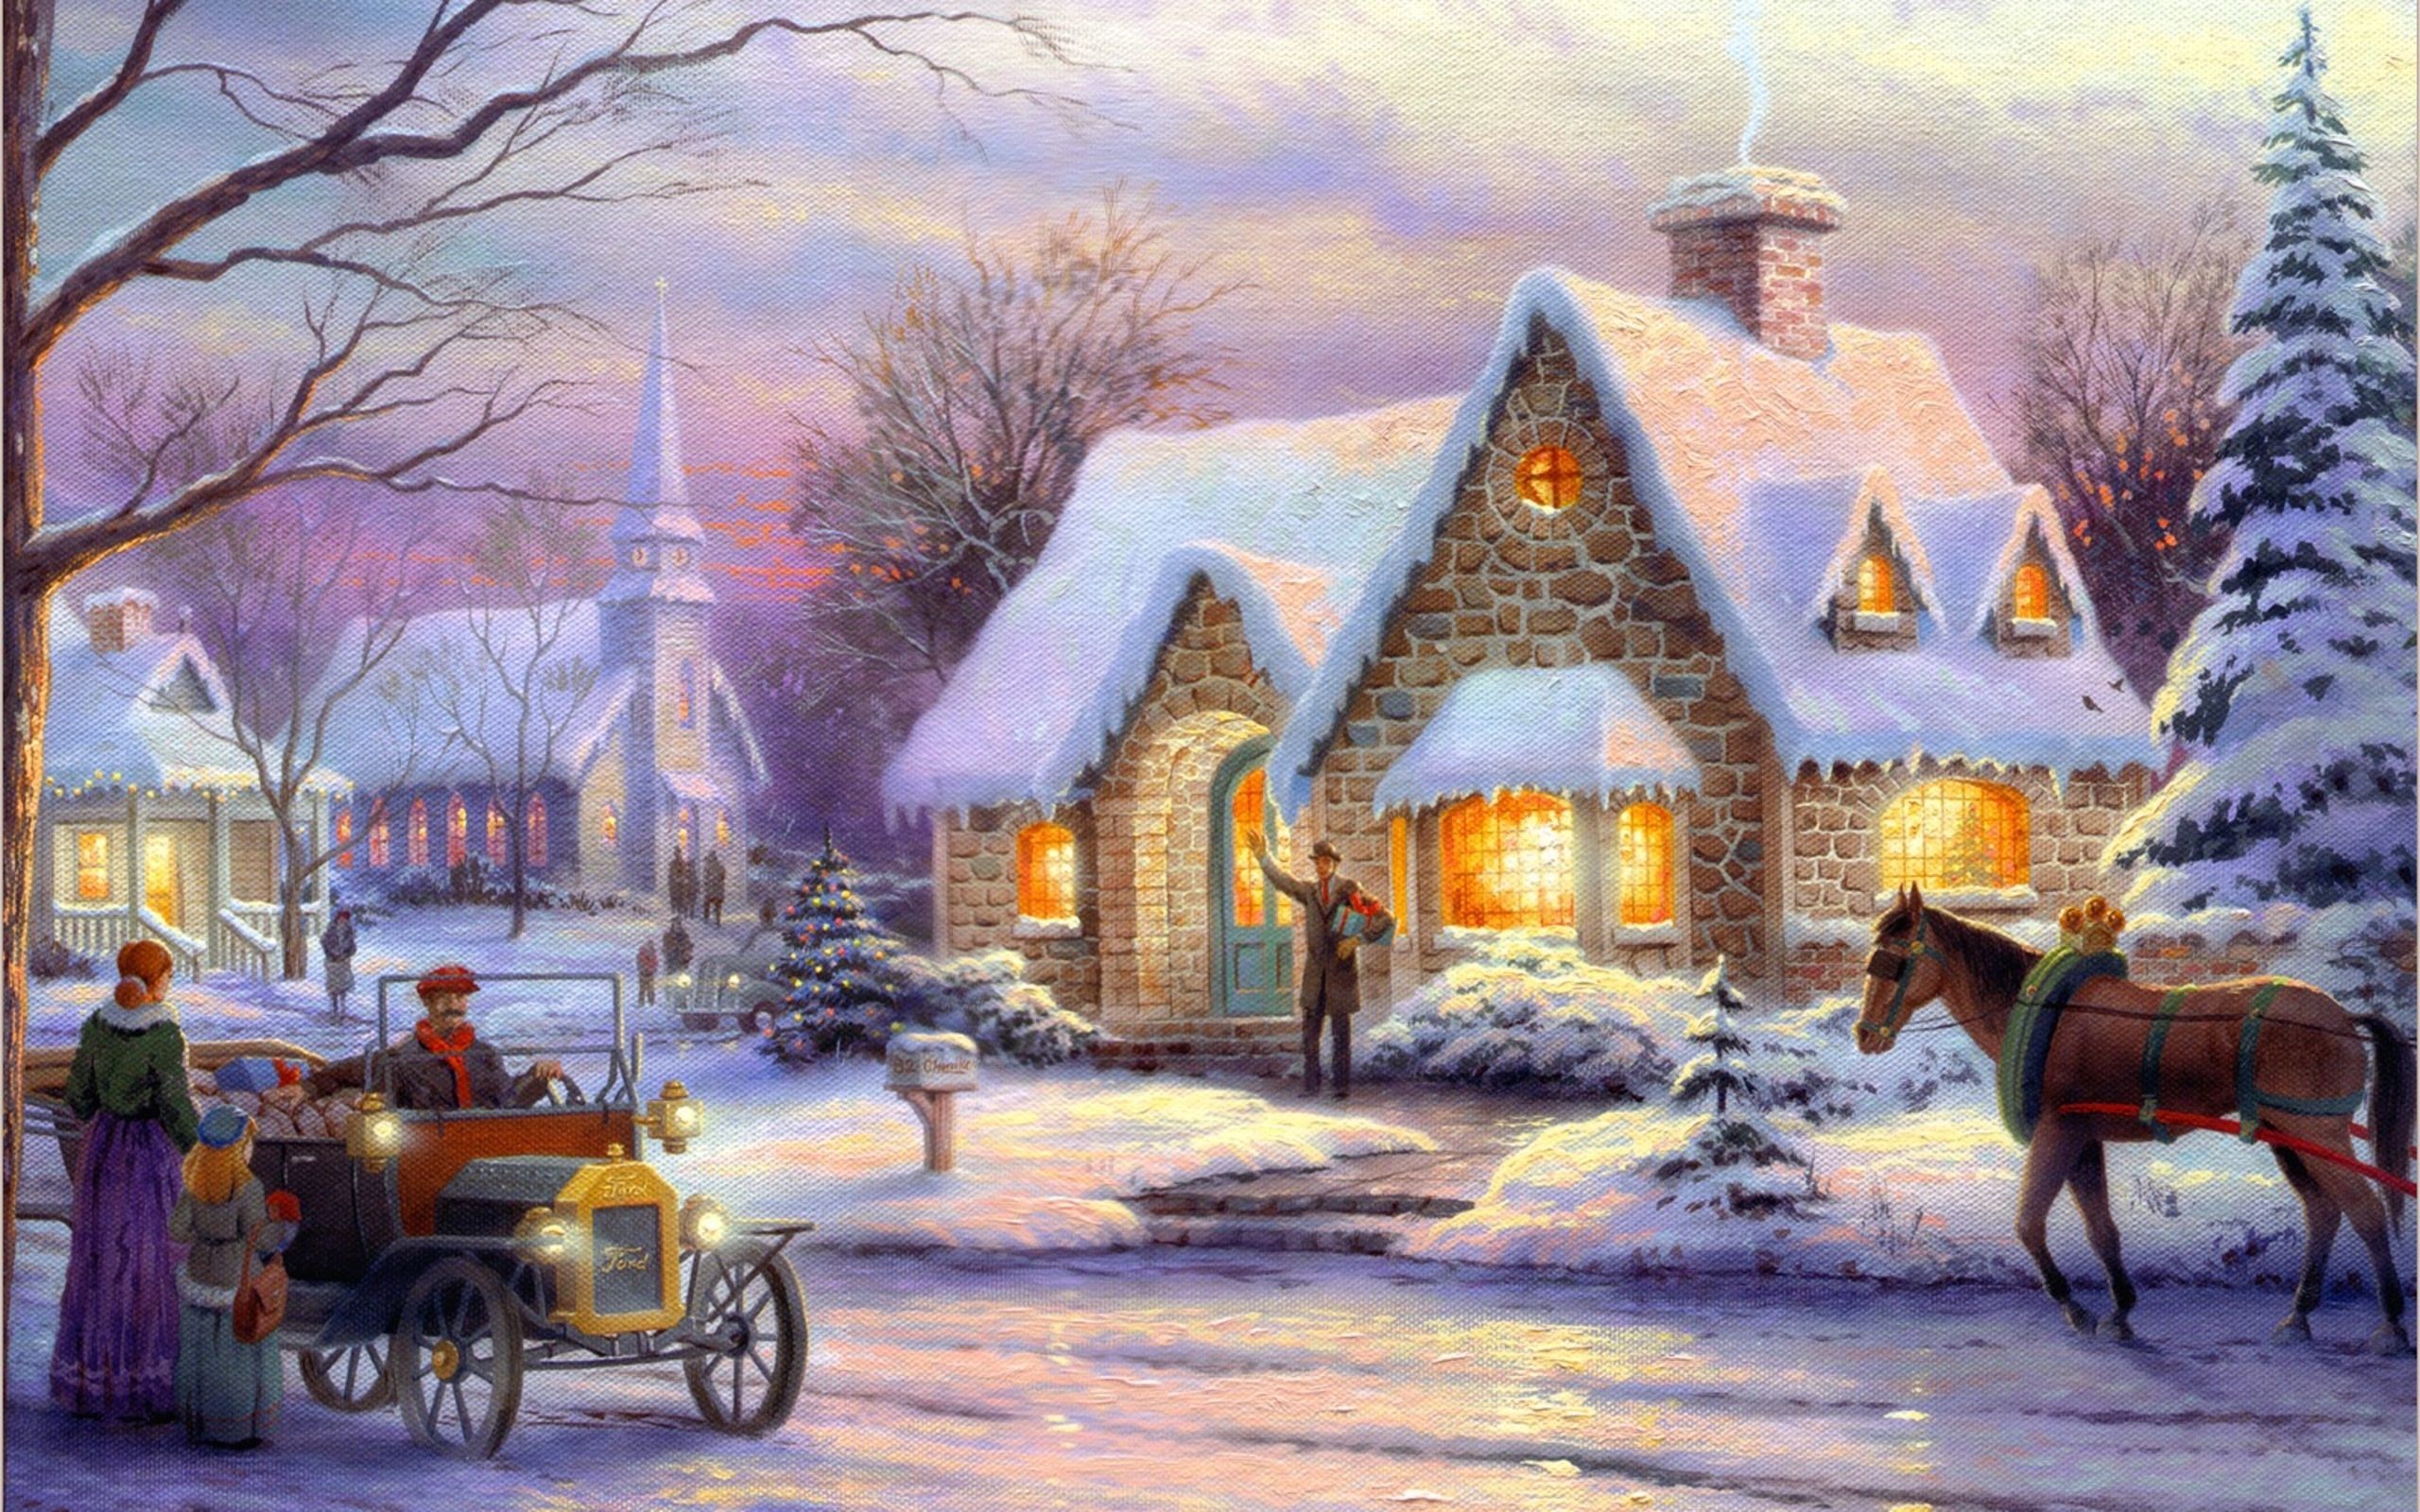 2560x1600 Memories of Christmas – Limited Edition Art - Christmas is the Season of  Light, and the hue that permeates Memories of Christmas is the rosy glow of  sunset.